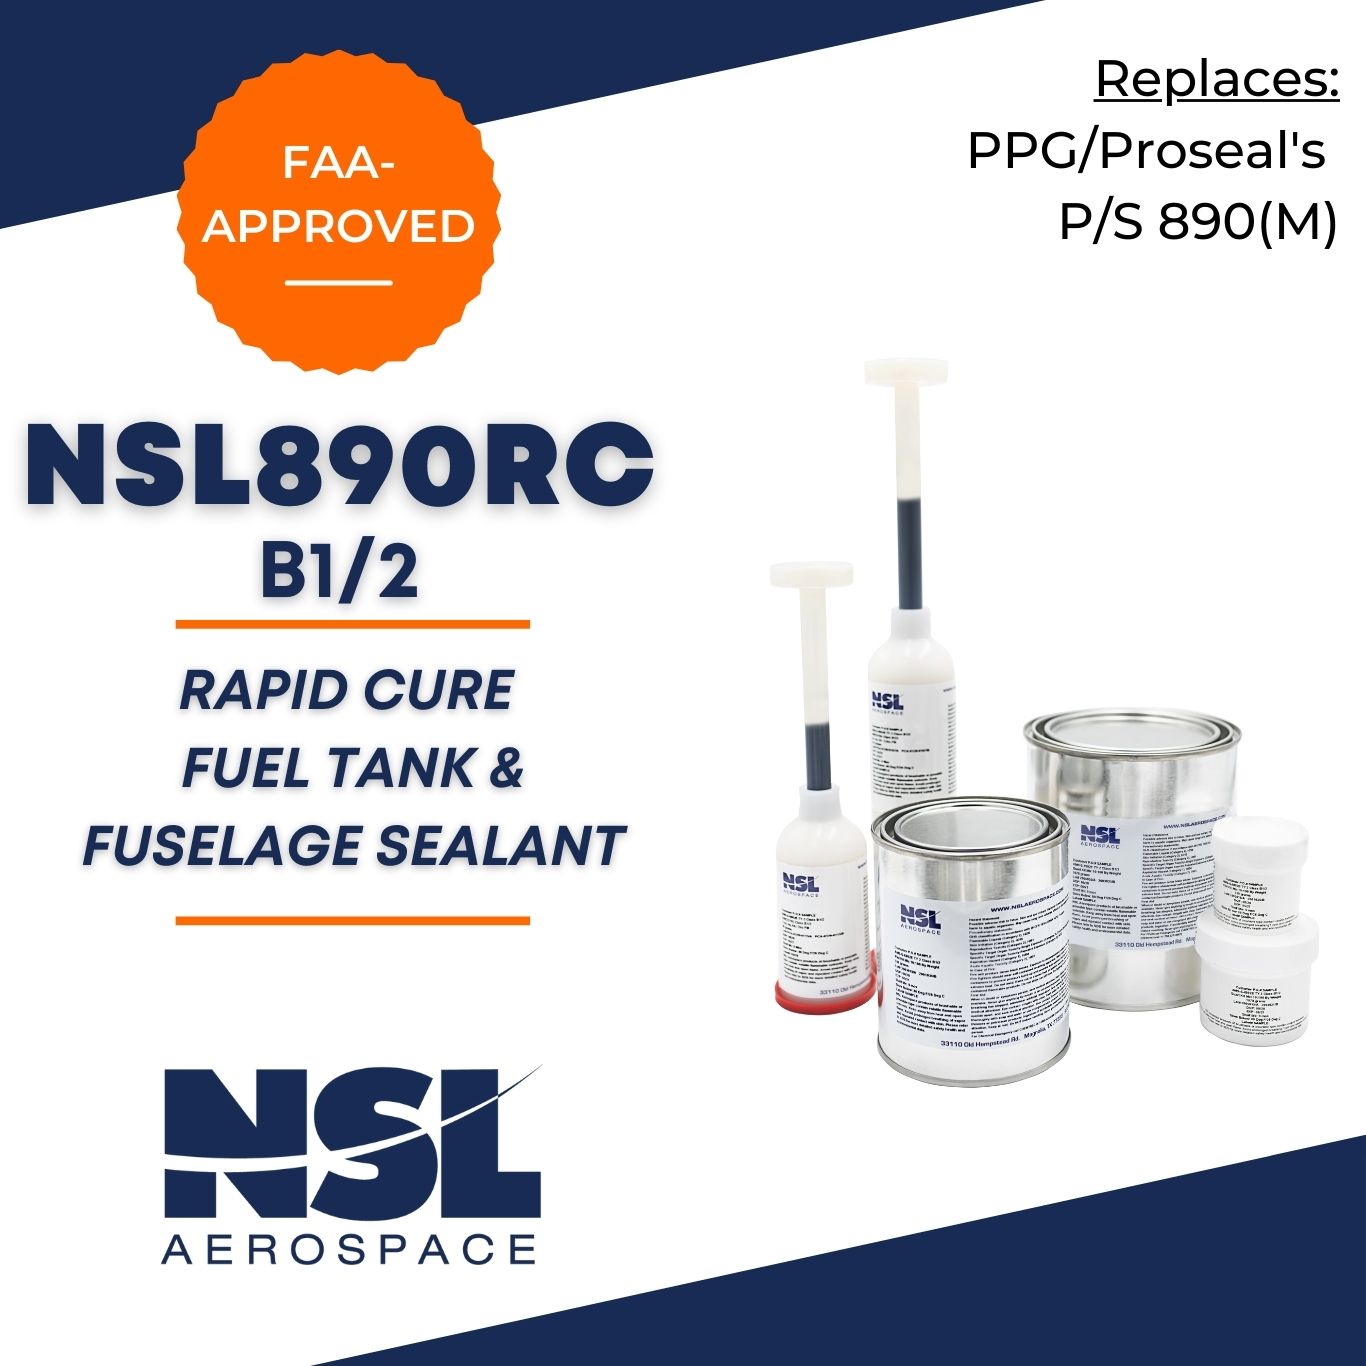 NSL890RC B1_2 Class A-B - PMA Replacement for P_S890RC Class A-B